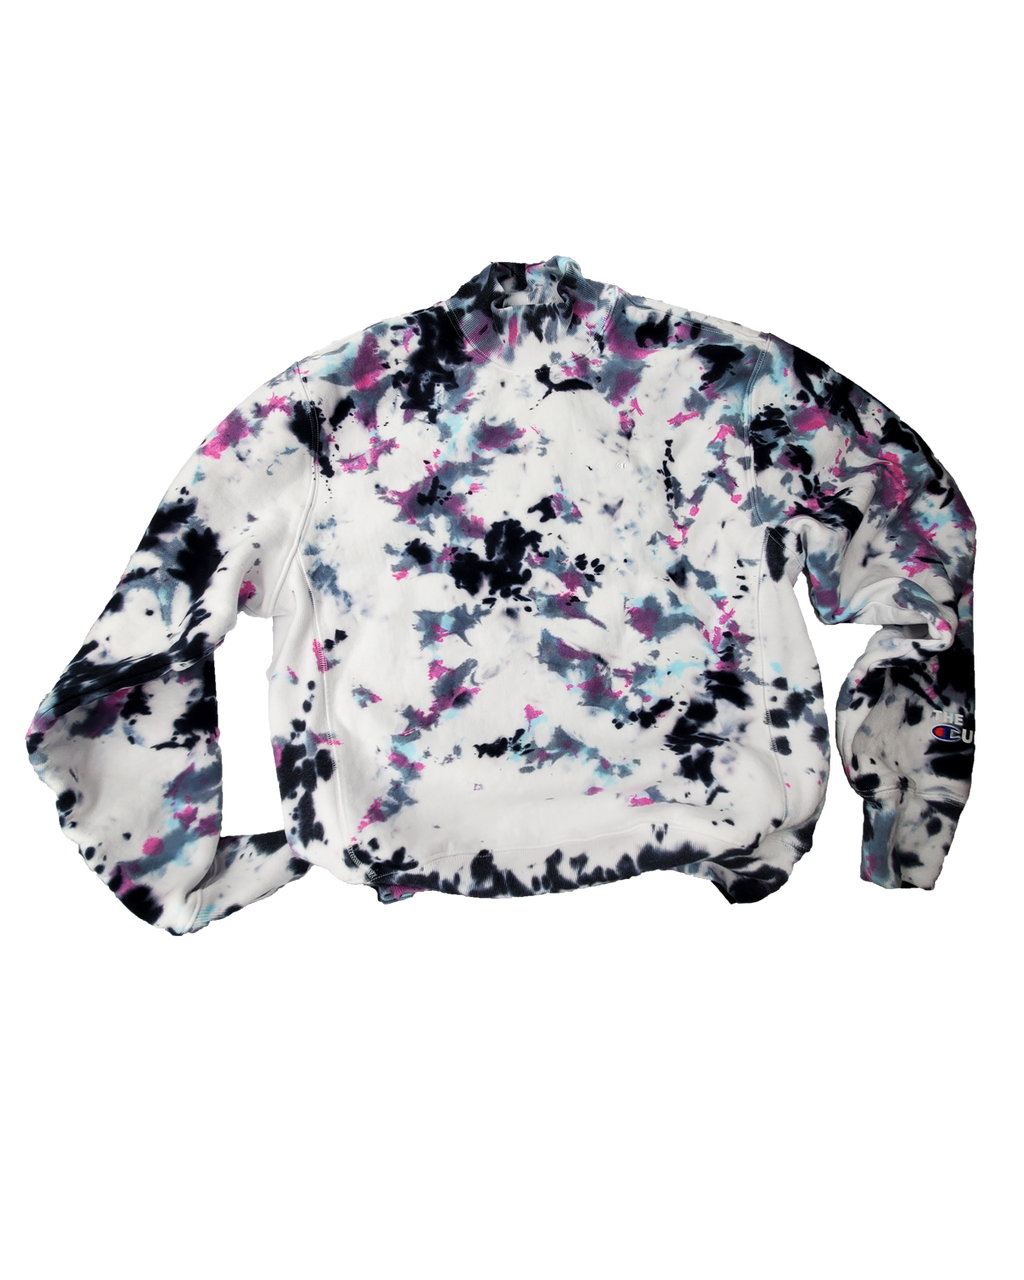 Hand Dyed Mockneck Sweatshirt - Black White Fuchsia Turquoise Grey - Champion Reverse Weave | Spotted Great Dane Tie Dye Limited Series